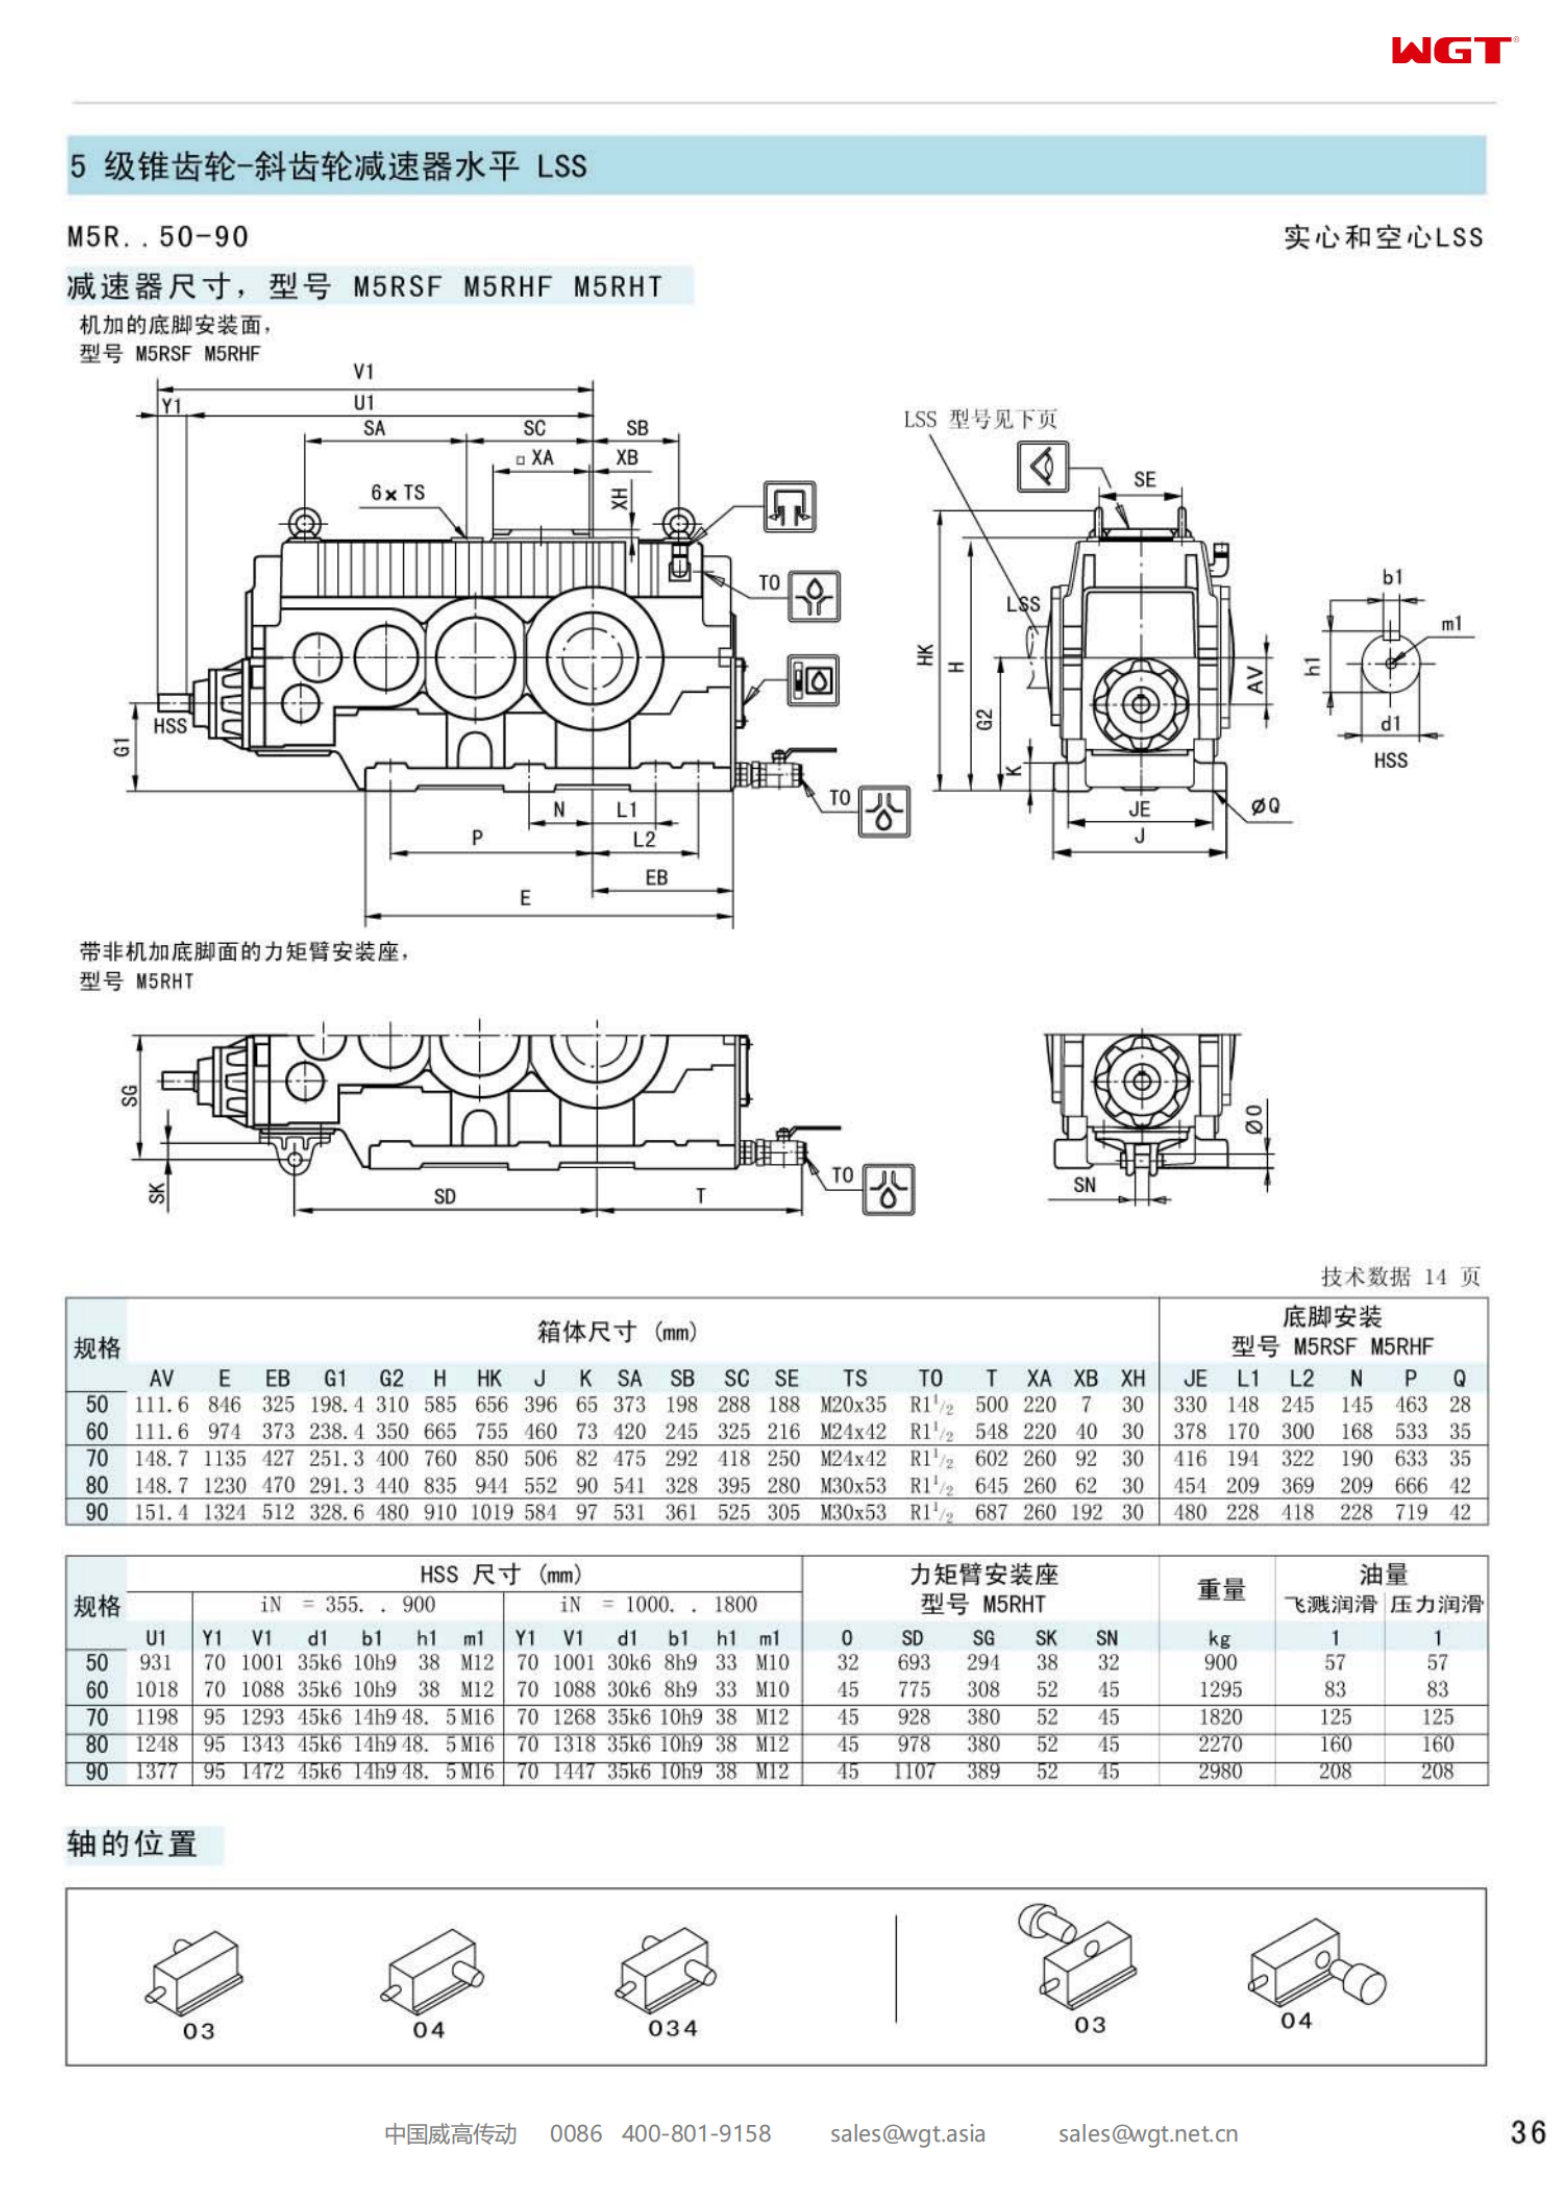 M5RHT70 Replace_SEW_M_Series Gearbox